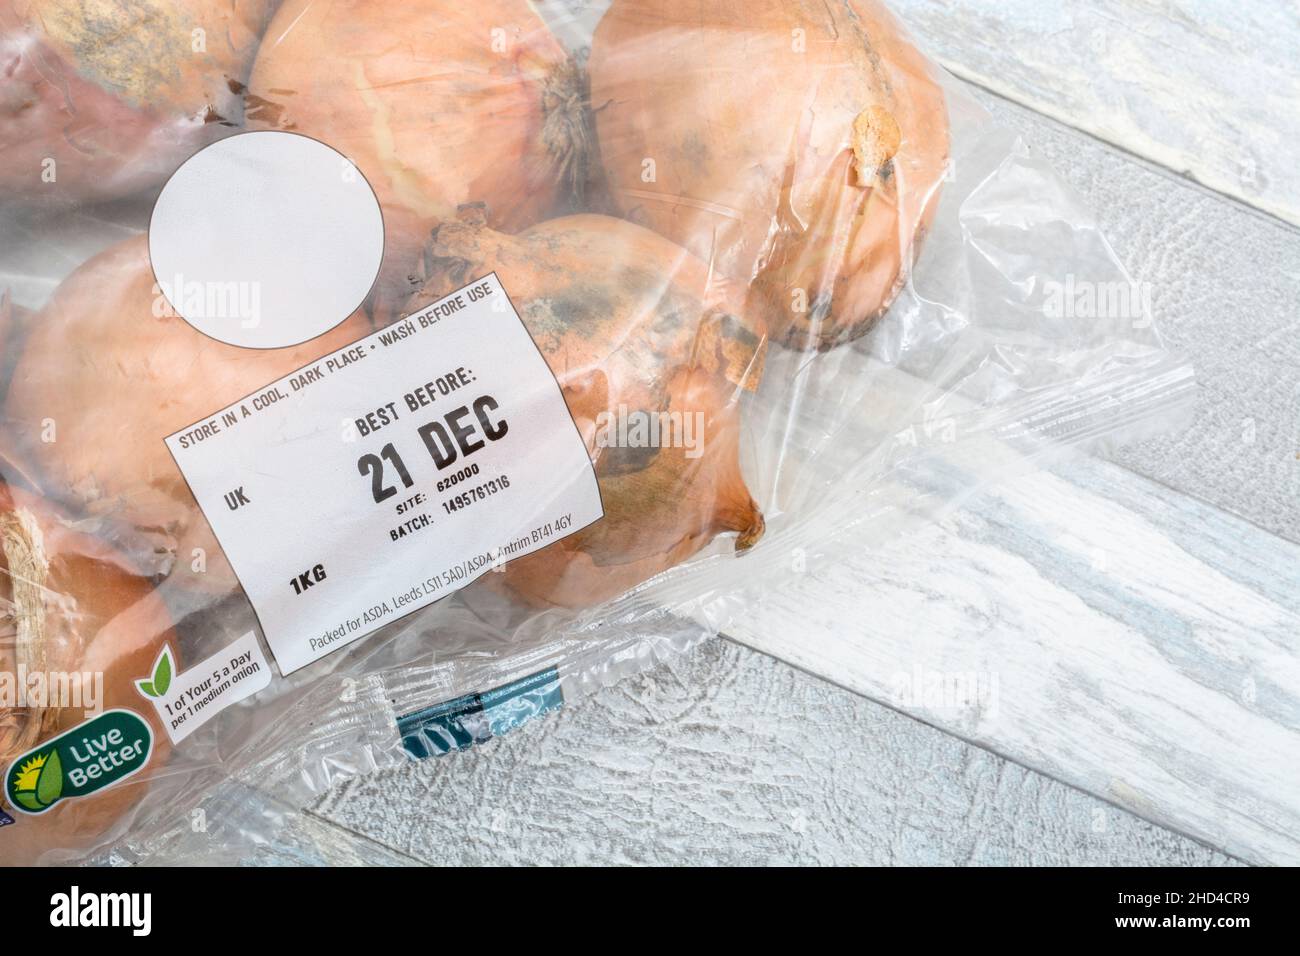 ASDA plastic packed Brown Onions / Allium cepa. Also called yellow onions + Best Before Date label / BBD. For common kitchen ingredients & medicinal. Stock Photo